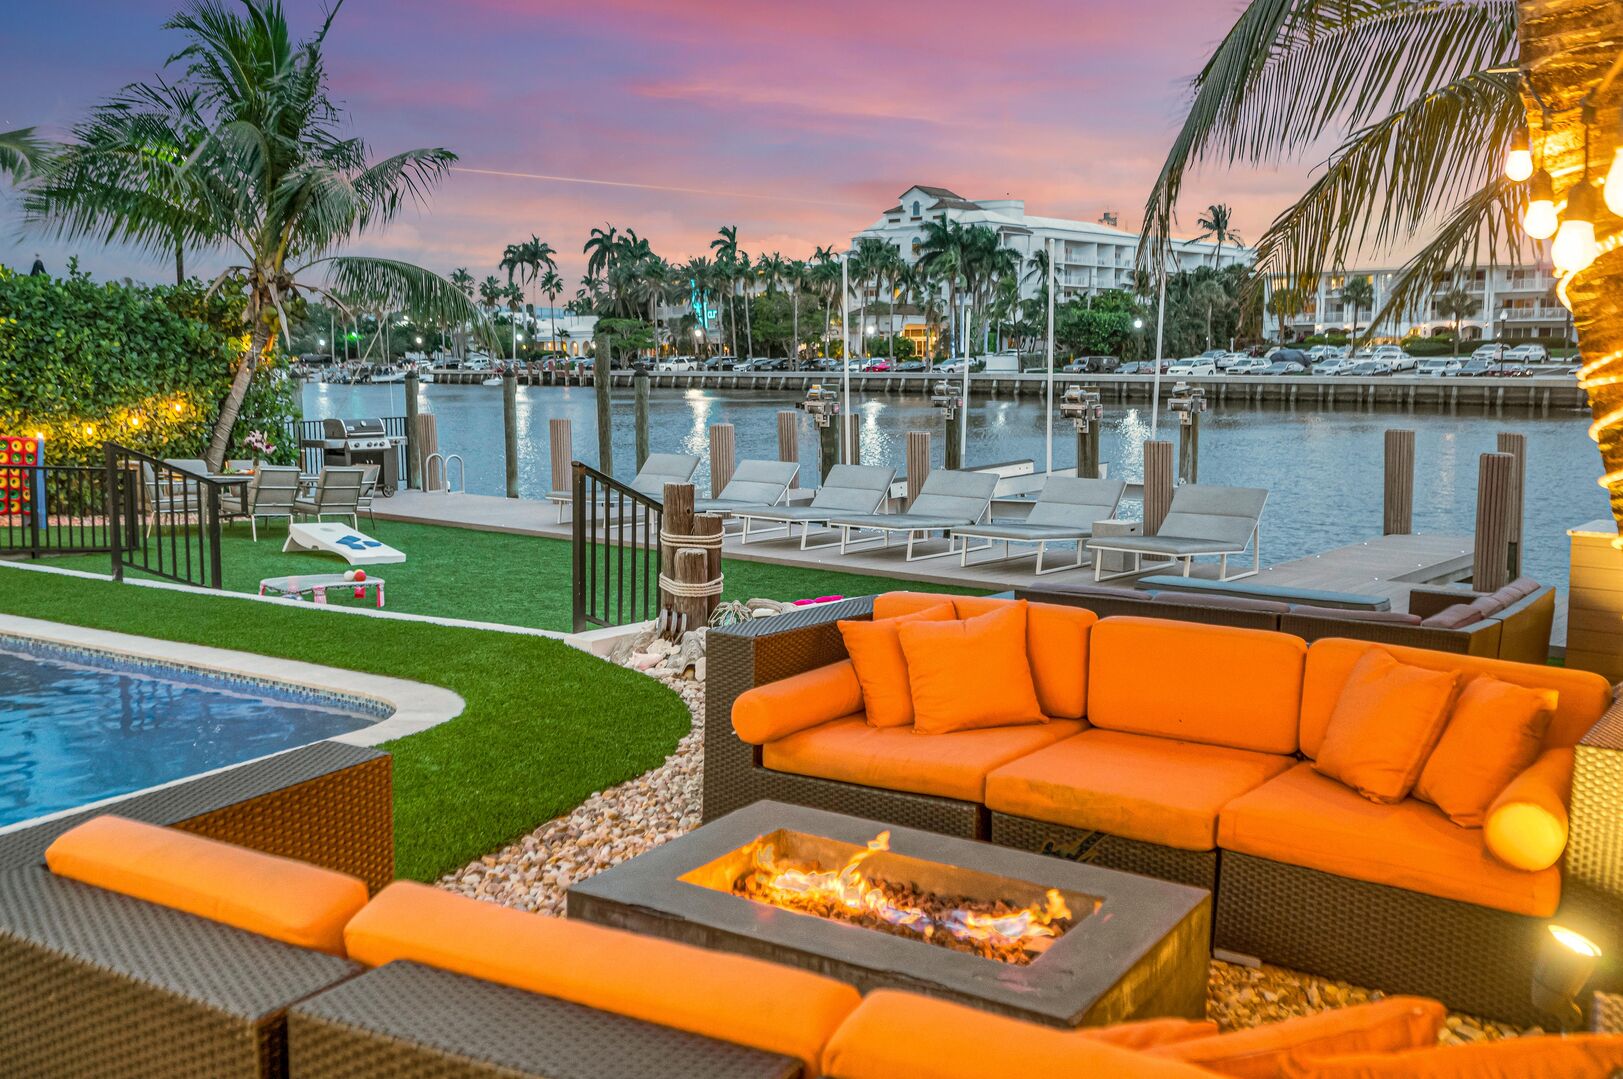 A perfect unwinding spot to enjoy a warm evening looking at the pink Florida sky.